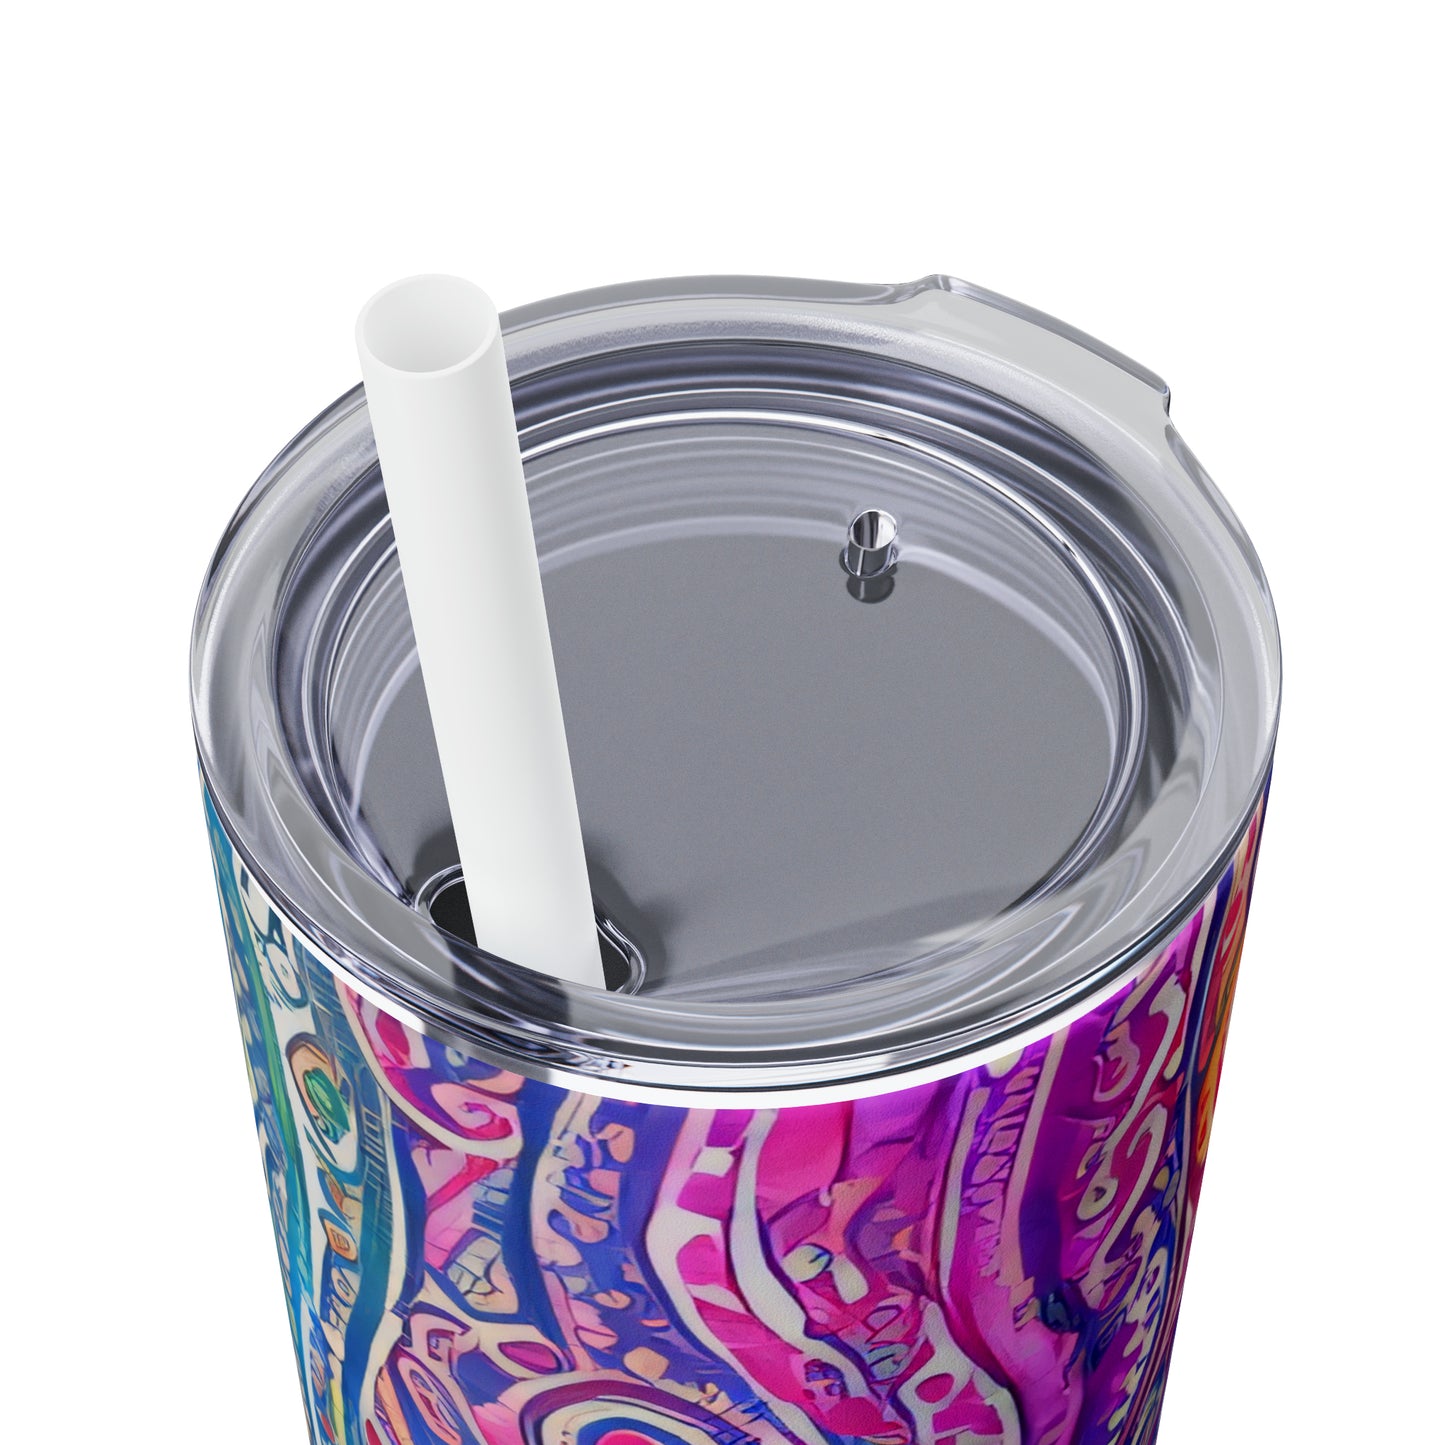 Amazing - Multicolored Watercolor Paisley 1 - Skinny Tumbler with Straw, 20oz - Stainless Steel